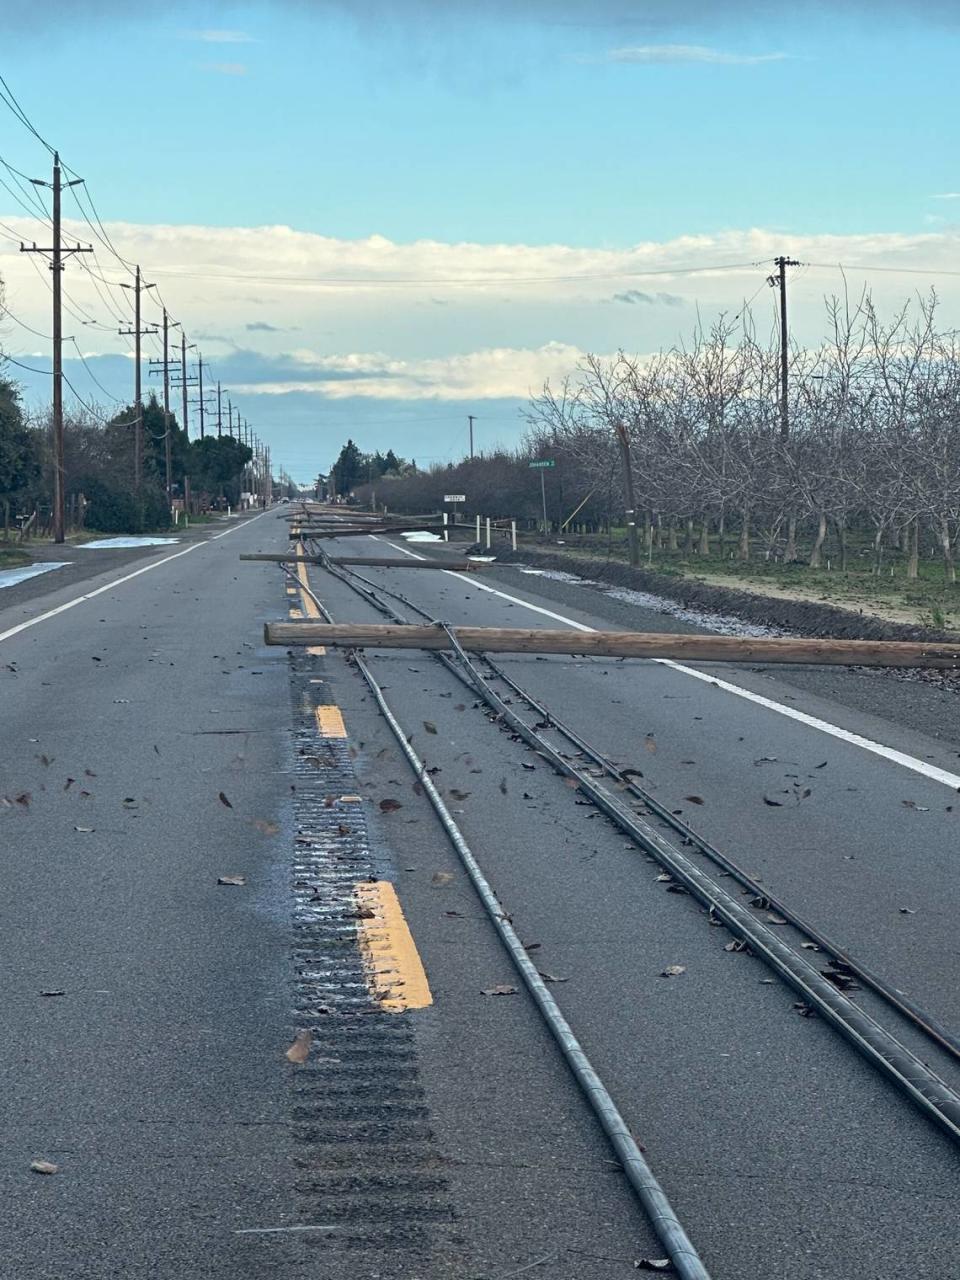 Phone poles and lines lie on Highway 132 east of Empire between Wellsford and Albers/Geer roads on Sunday afternoon, Feb. 4. California Highway Patrol Modesto office